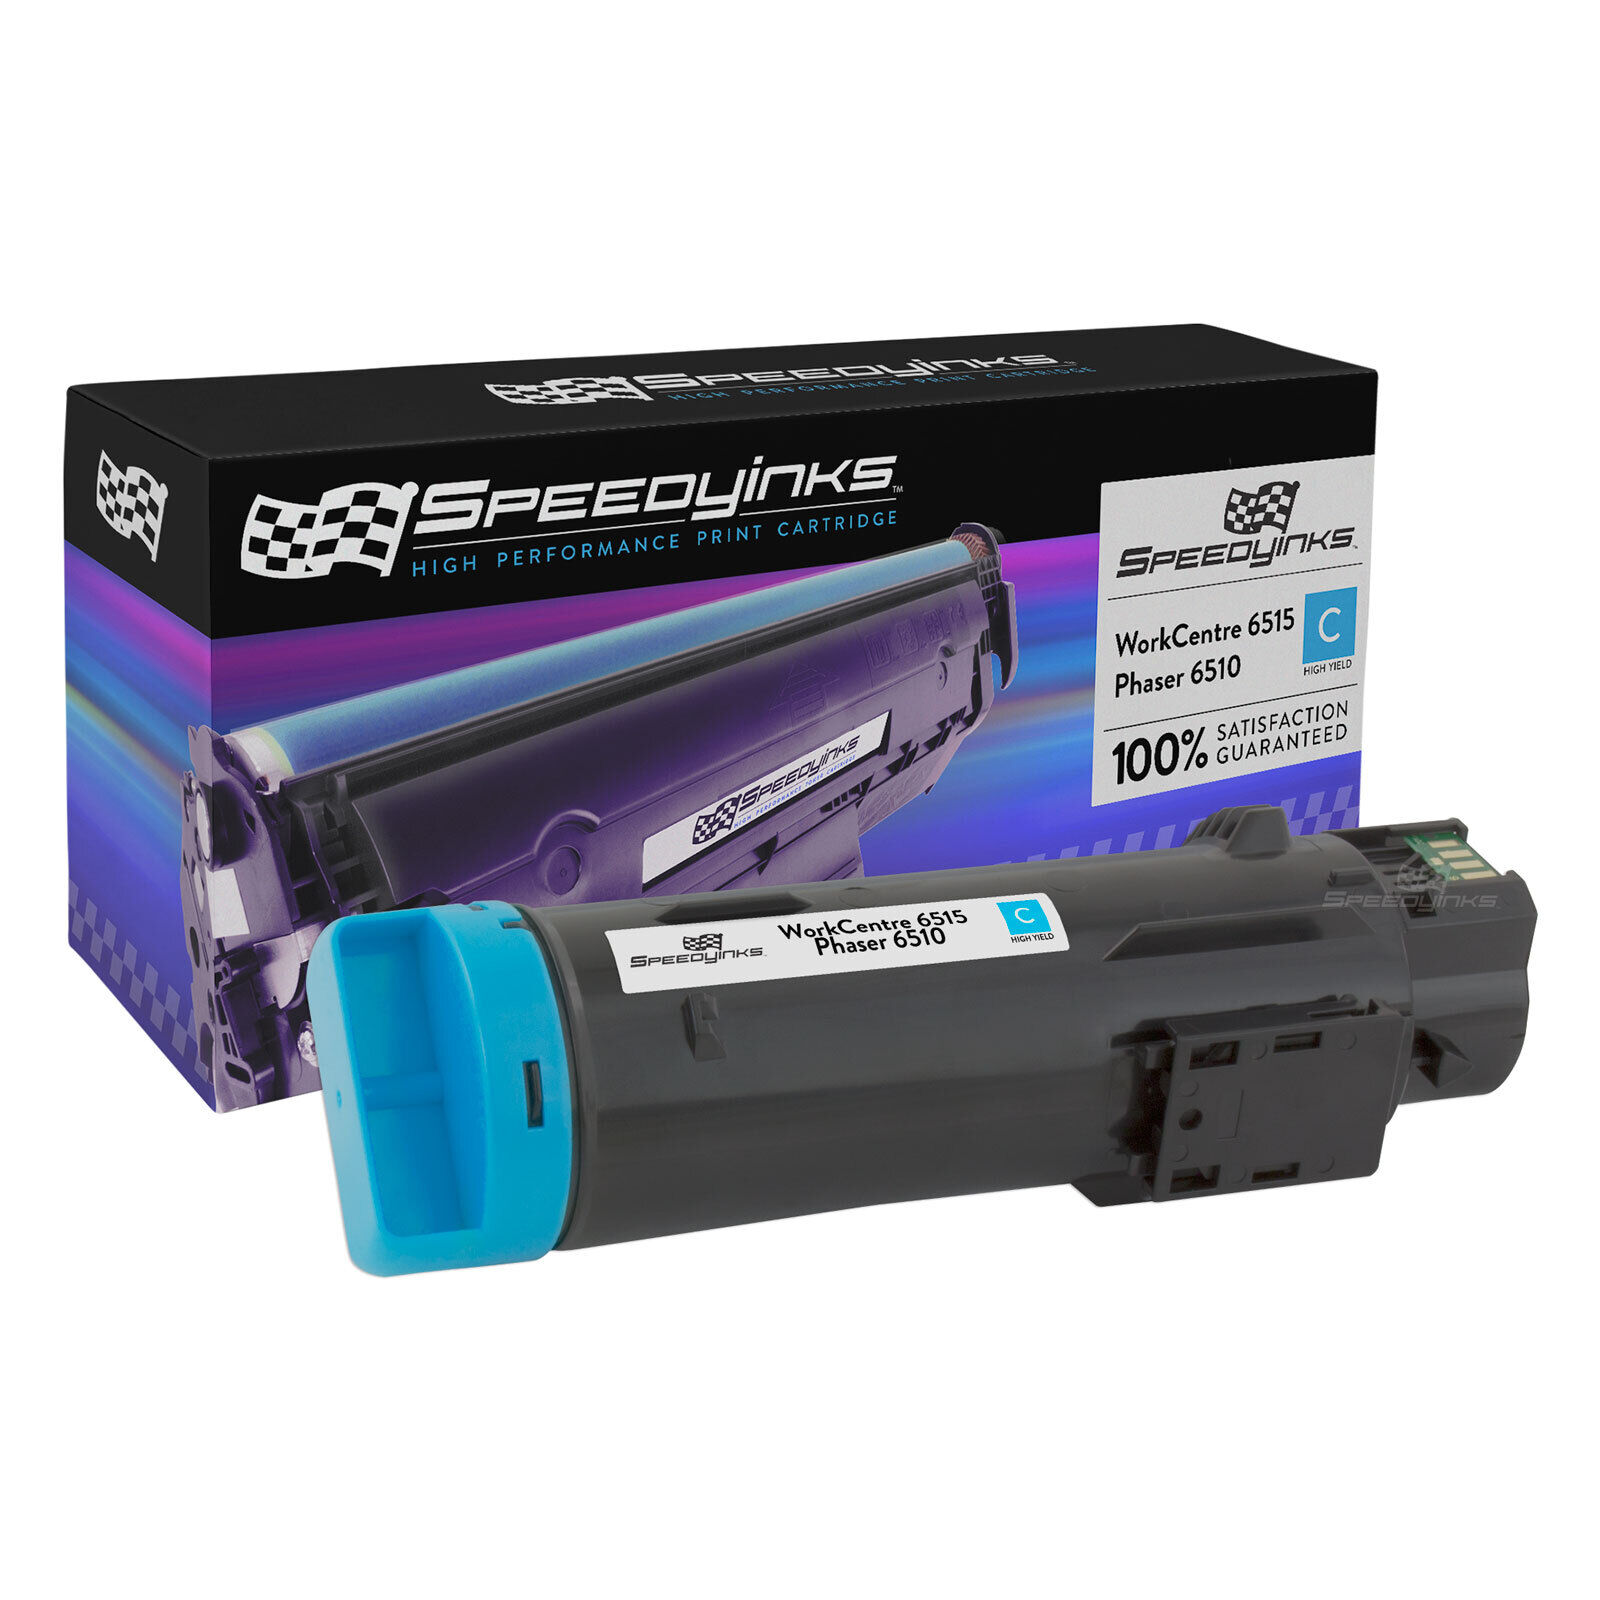 Compatible Toner for Xerox Phaser 6510 & WorkCentre 6515 High Yield (Cyan)